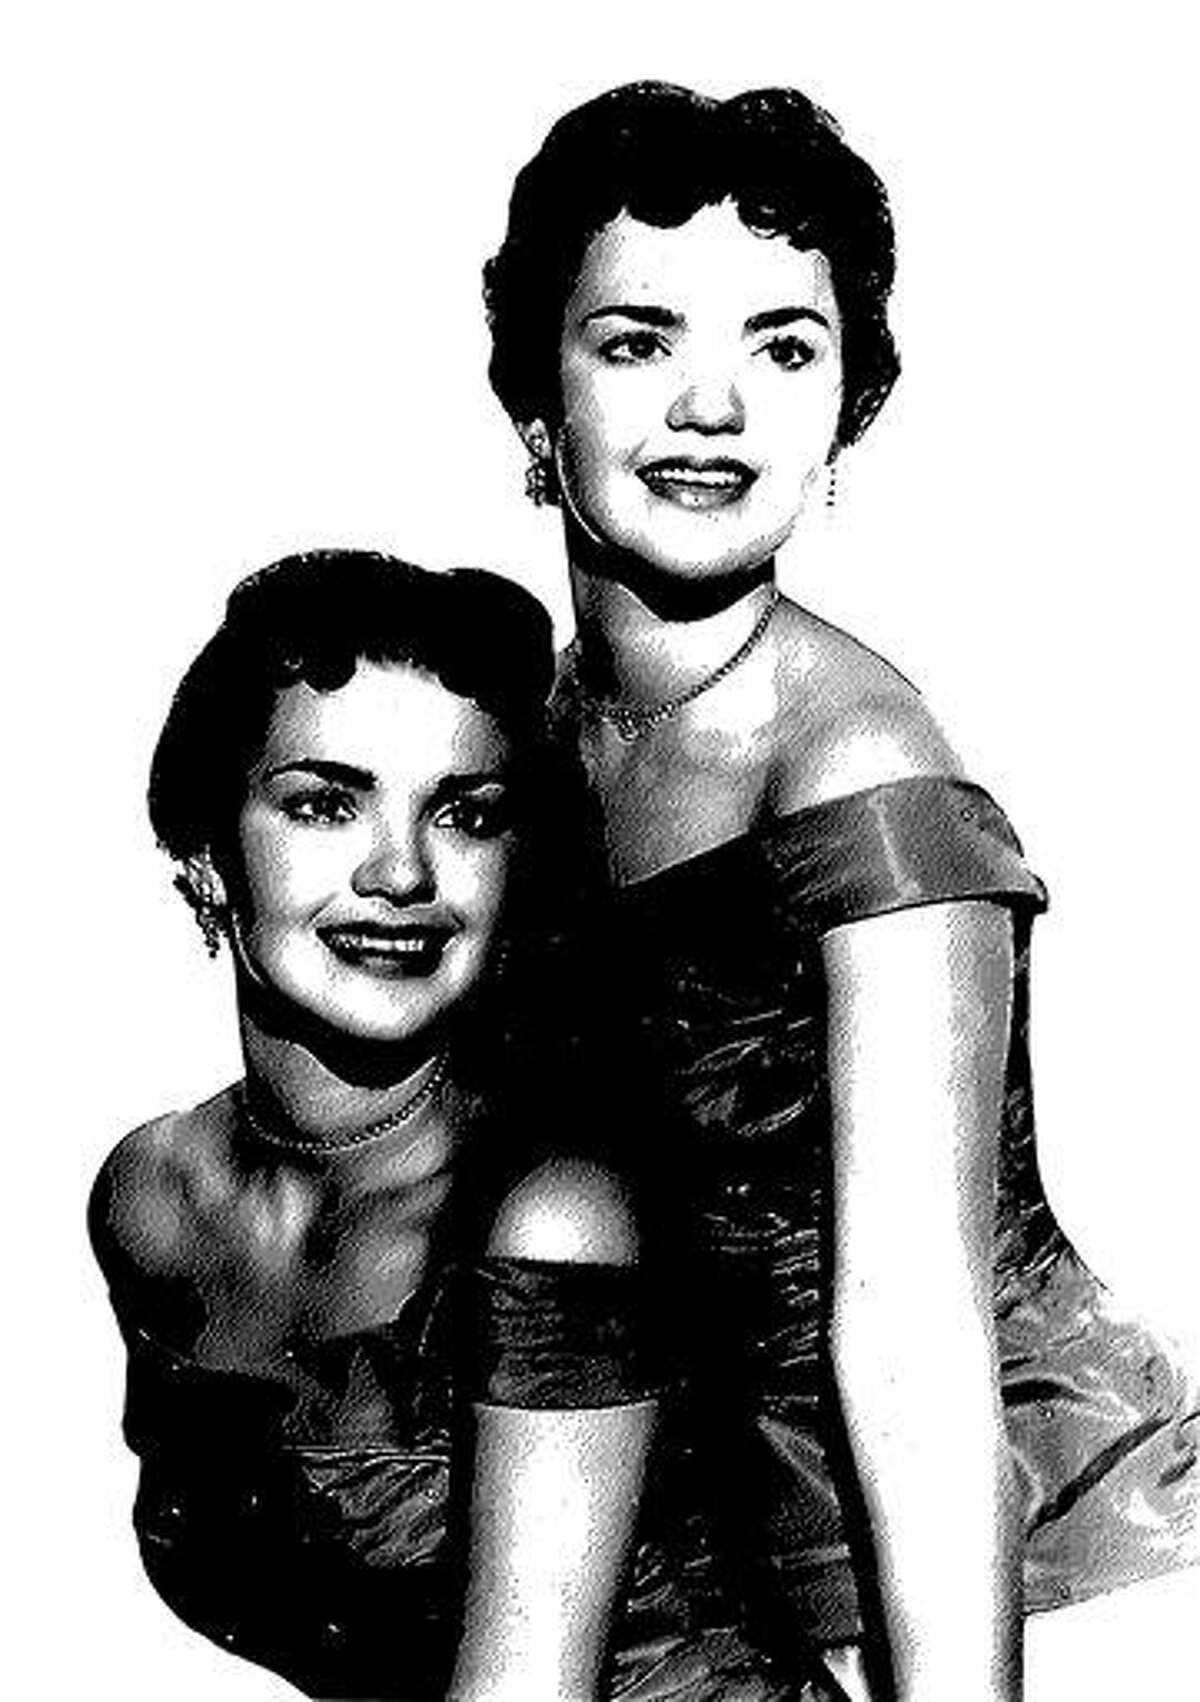 This undated copy of a photo provided by the El Dorado County Sheriff's Office shows twin sisters Patricia and Joan Miller. It is unknown which sister is which. Associated Press